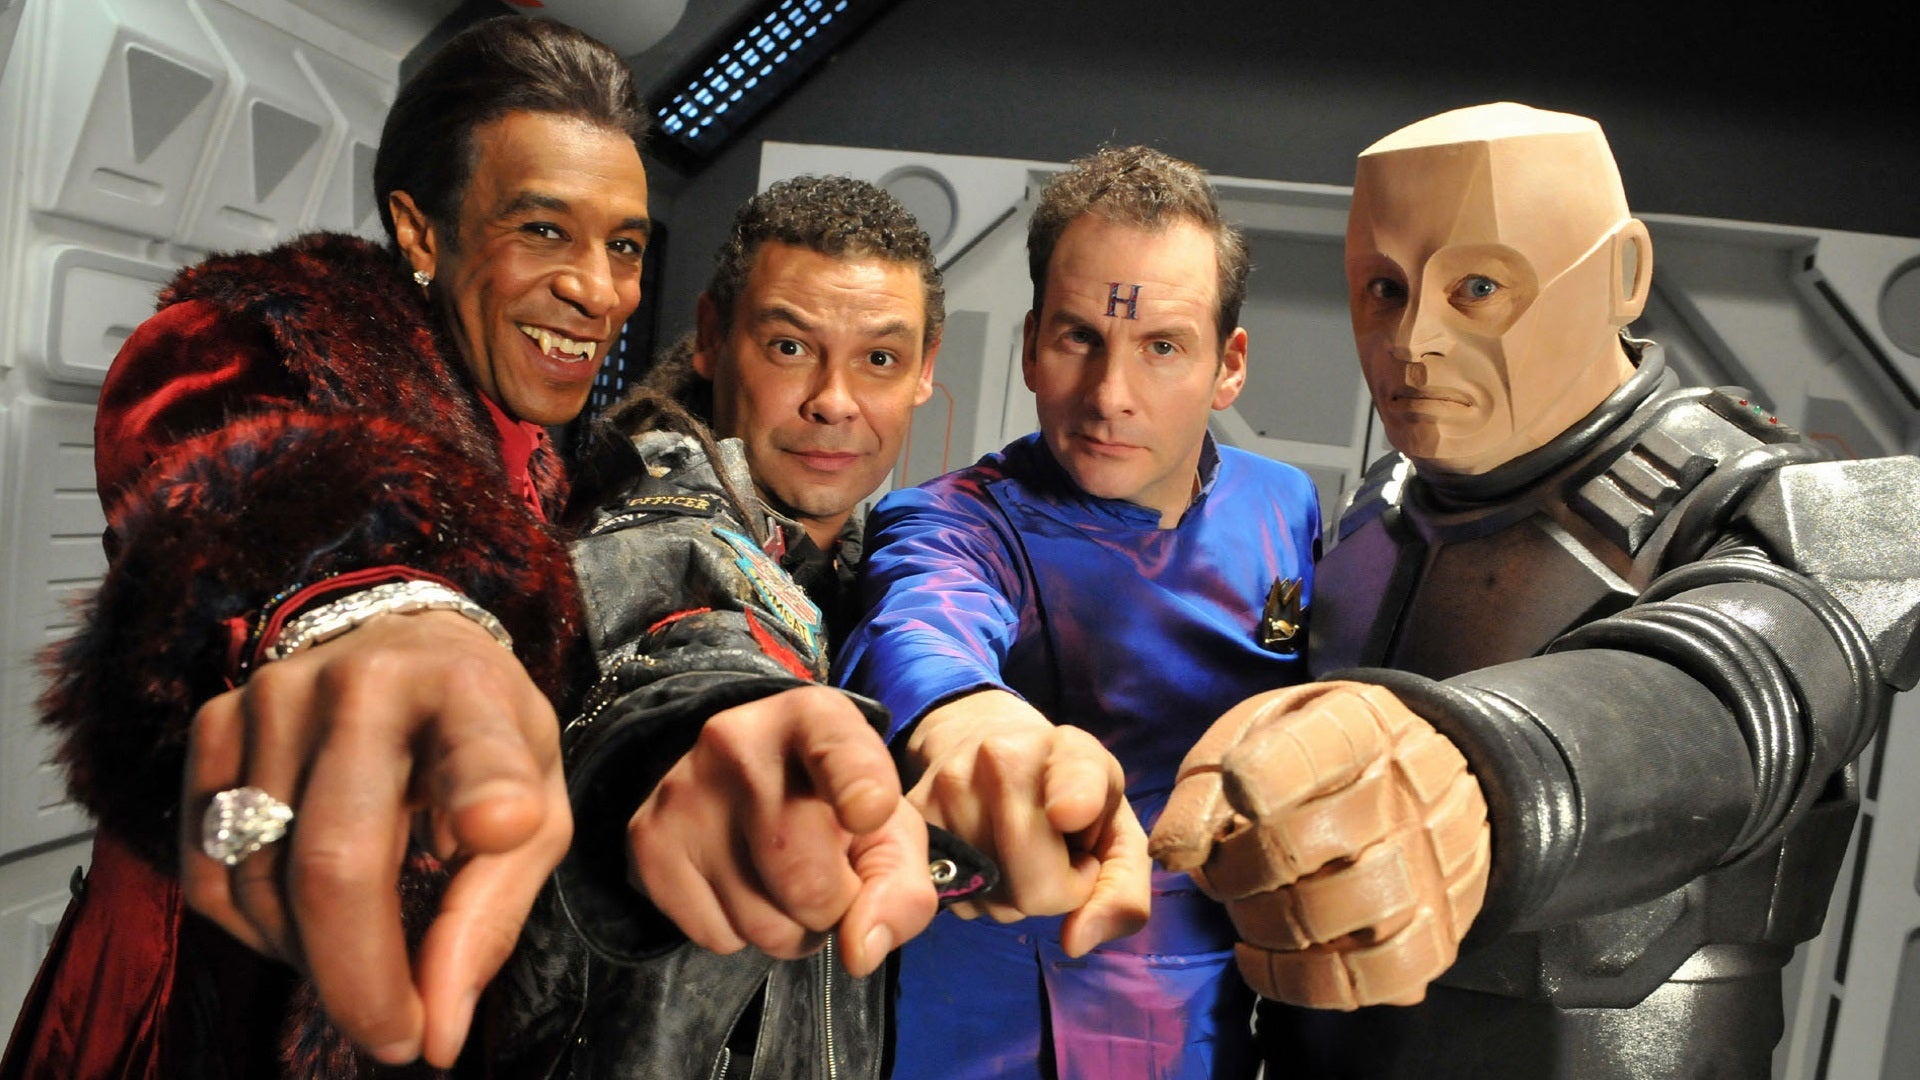 Red Dwarf: The Complete Collection - Seasons 1-8